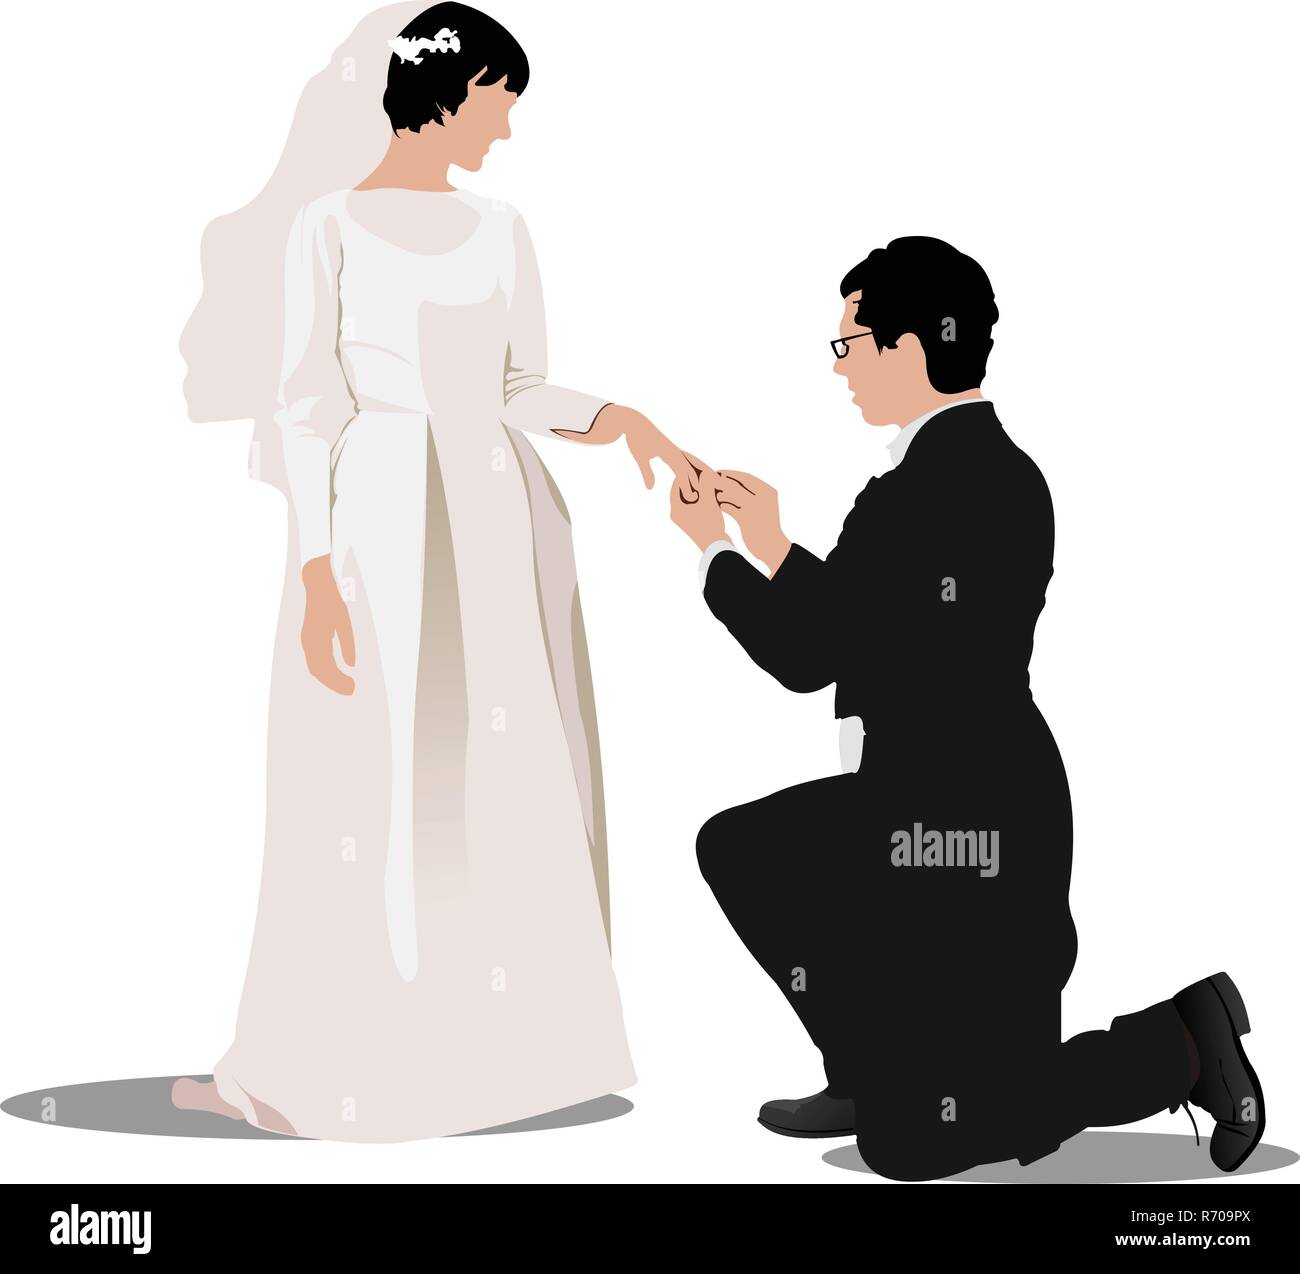 Wedding Rings Pair, Obligation, Celebration, Ceremony PNG Transparent Image  and Clipart for Free Download